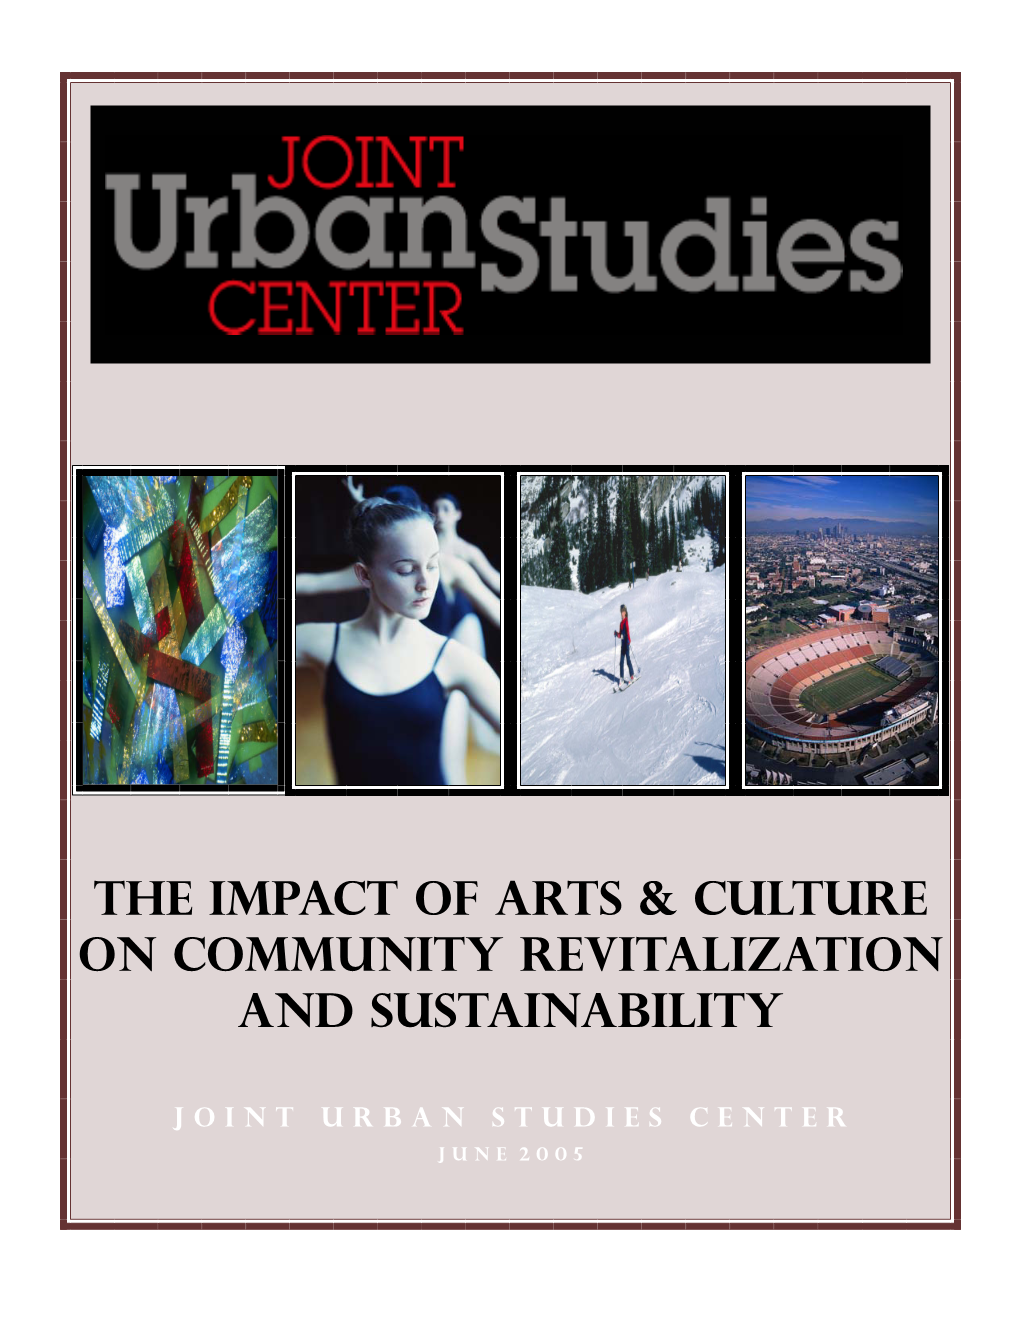 The Impact of Arts, Culture, Recreation, and Venue As a Community Revitalization Tool